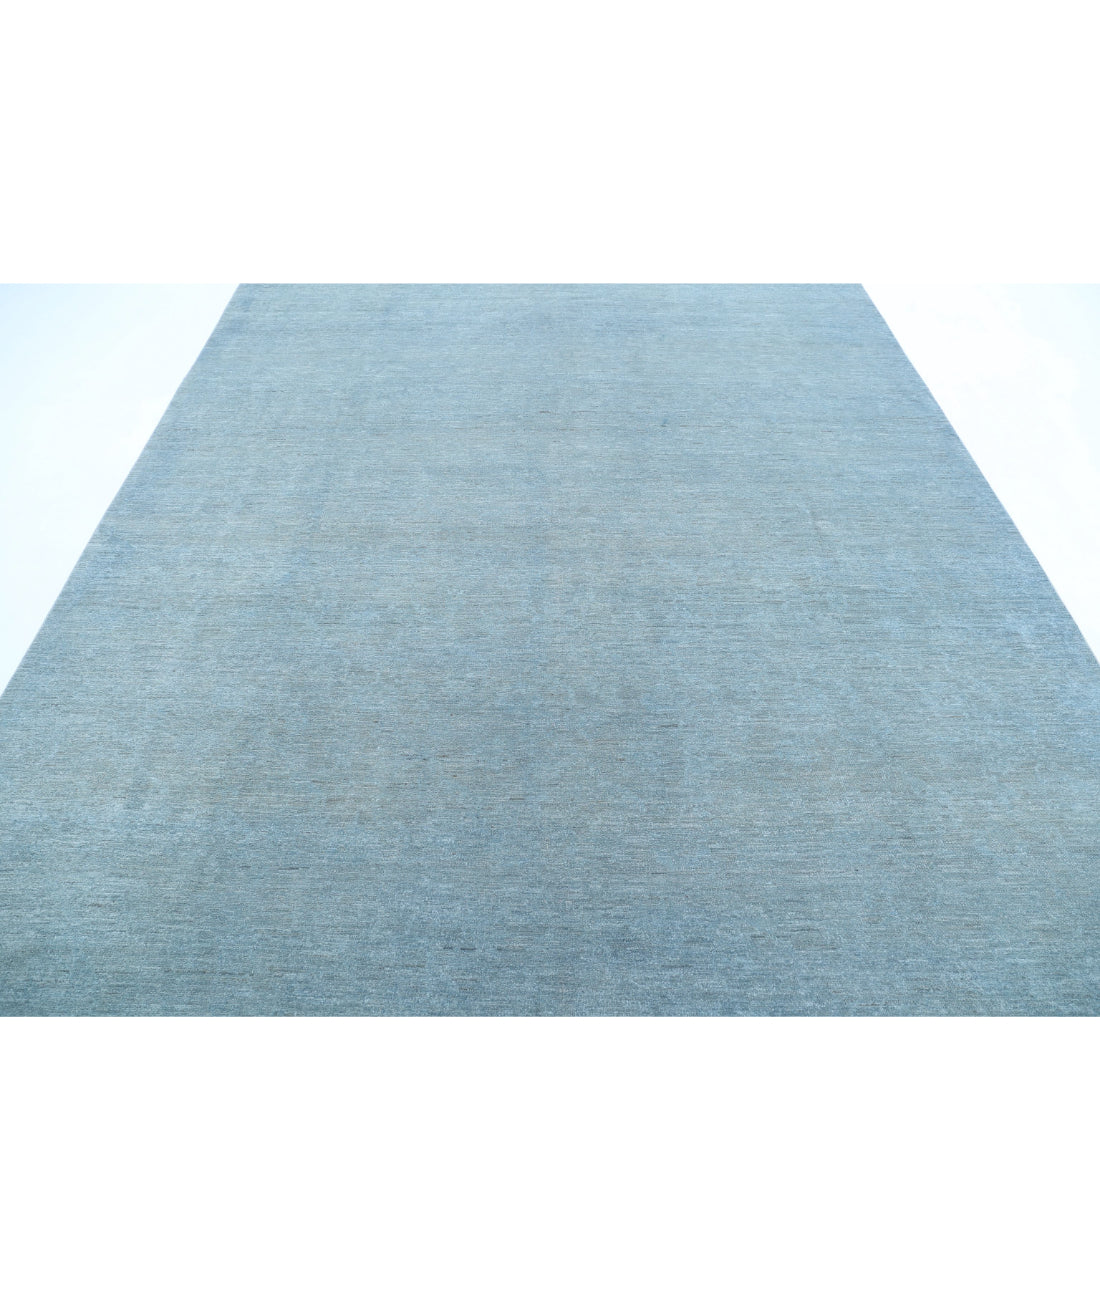 Hand Knotted Overdye Wool Rug - 7'11'' x 9'11'' 7'11'' x 9'11'' (238 X 298) / Blue / Blue